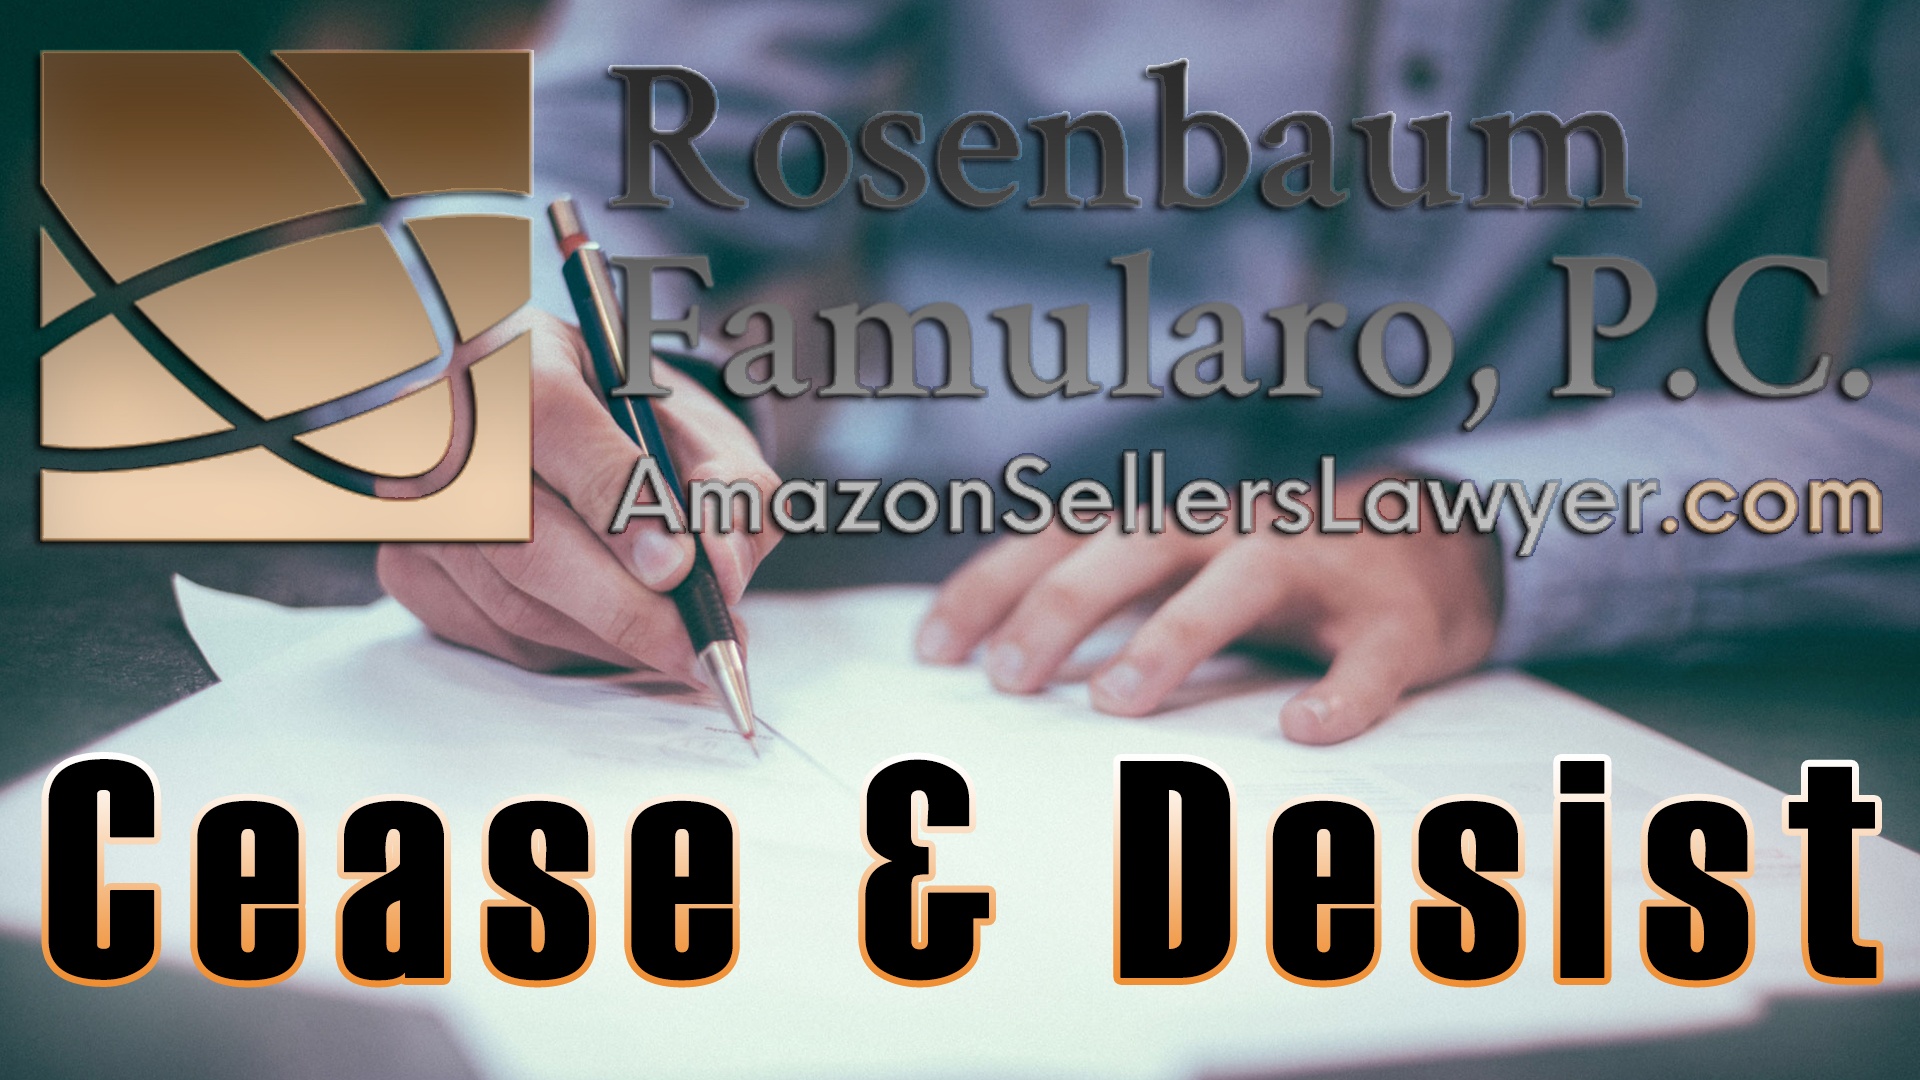 cease & desist letters to unauthorized Amazon sellers